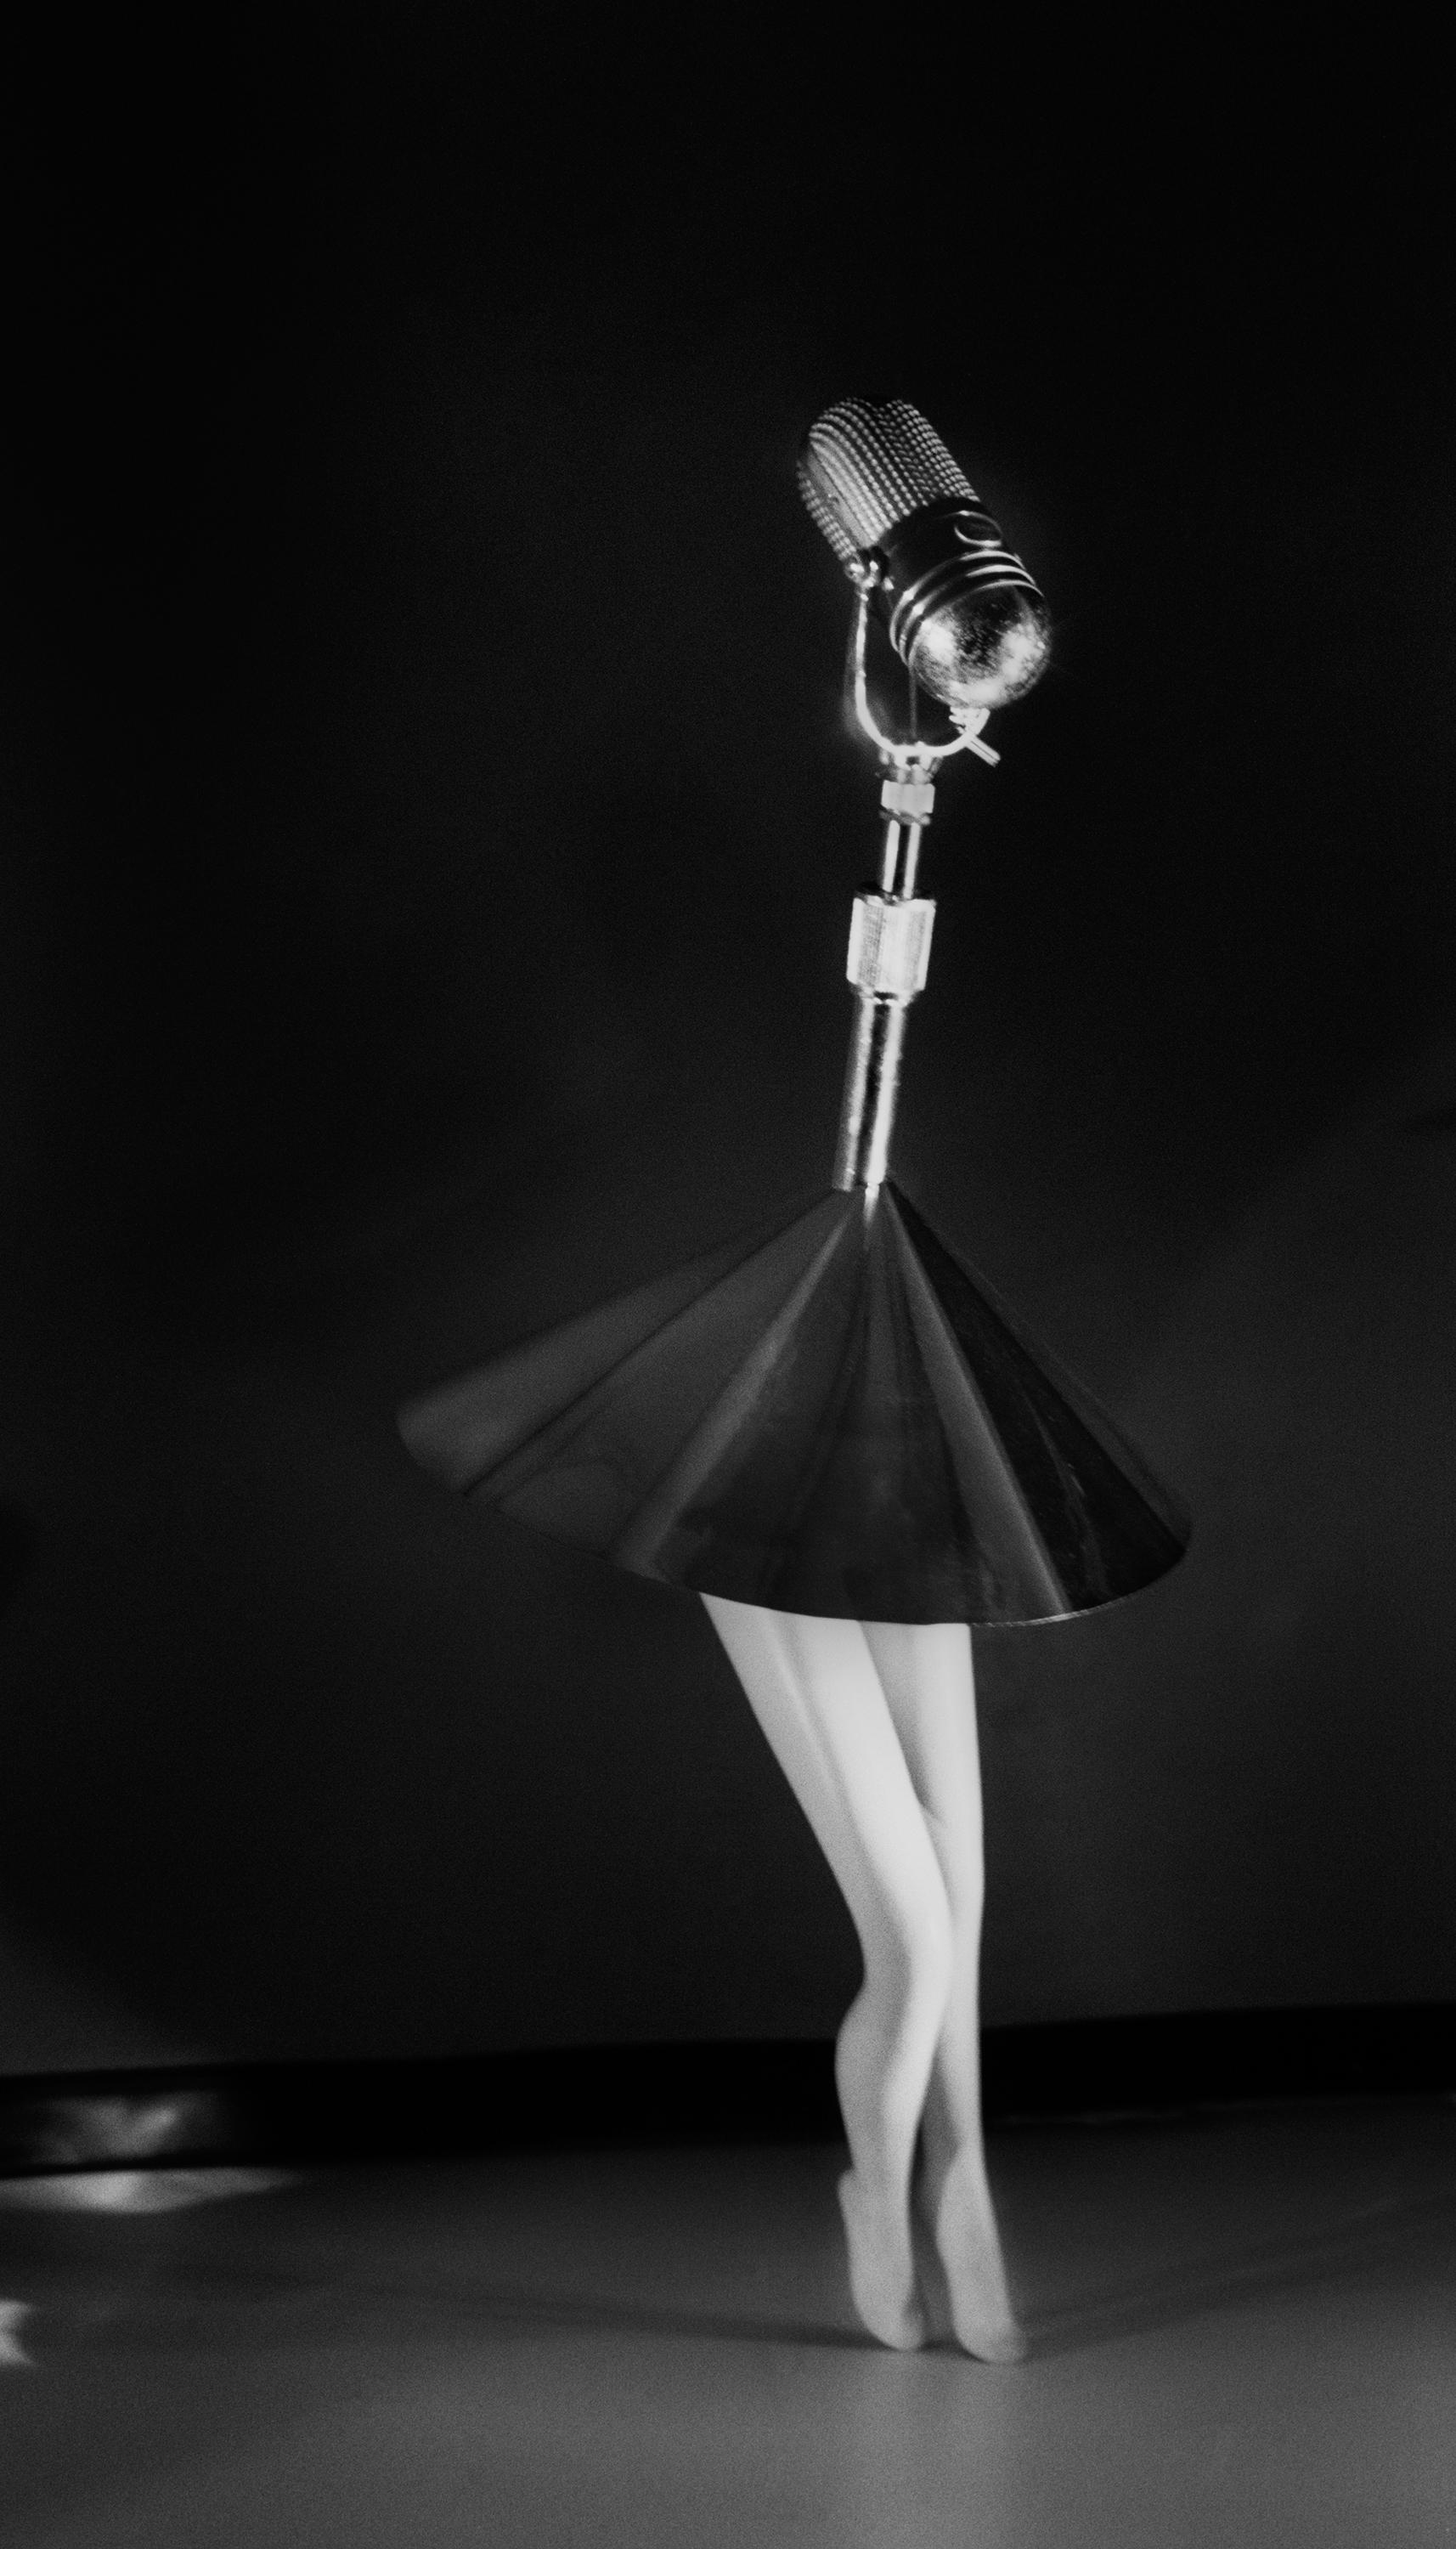 An old-fashioned microphone is mounted atop a short a-line skirt and feminine legs. It appears as though the microphone is performing onstage or posing for a portrait photo.